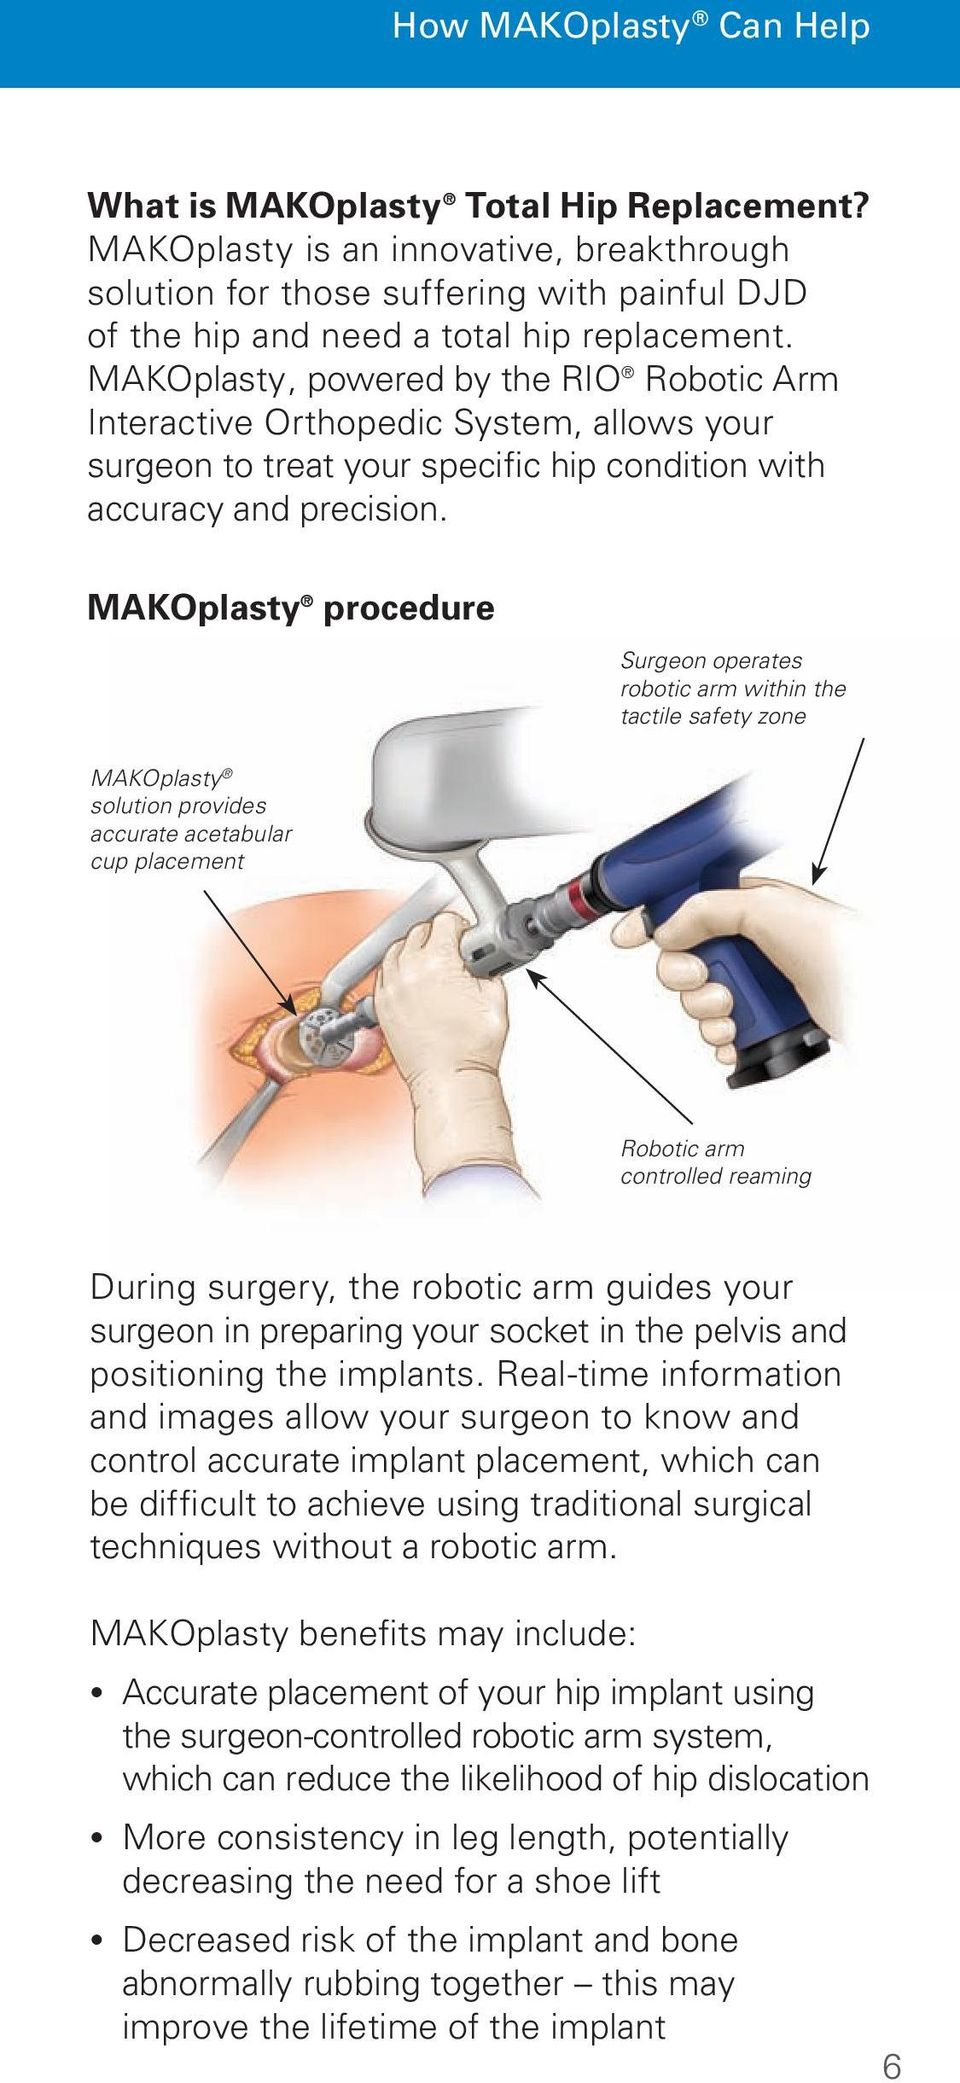 MAKOplasty procedure Surgeon operates robotic arm within the tactile safety zone MAKOplasty solution provides accurate acetabular cup placement Robotic arm controlled reaming During surgery, the